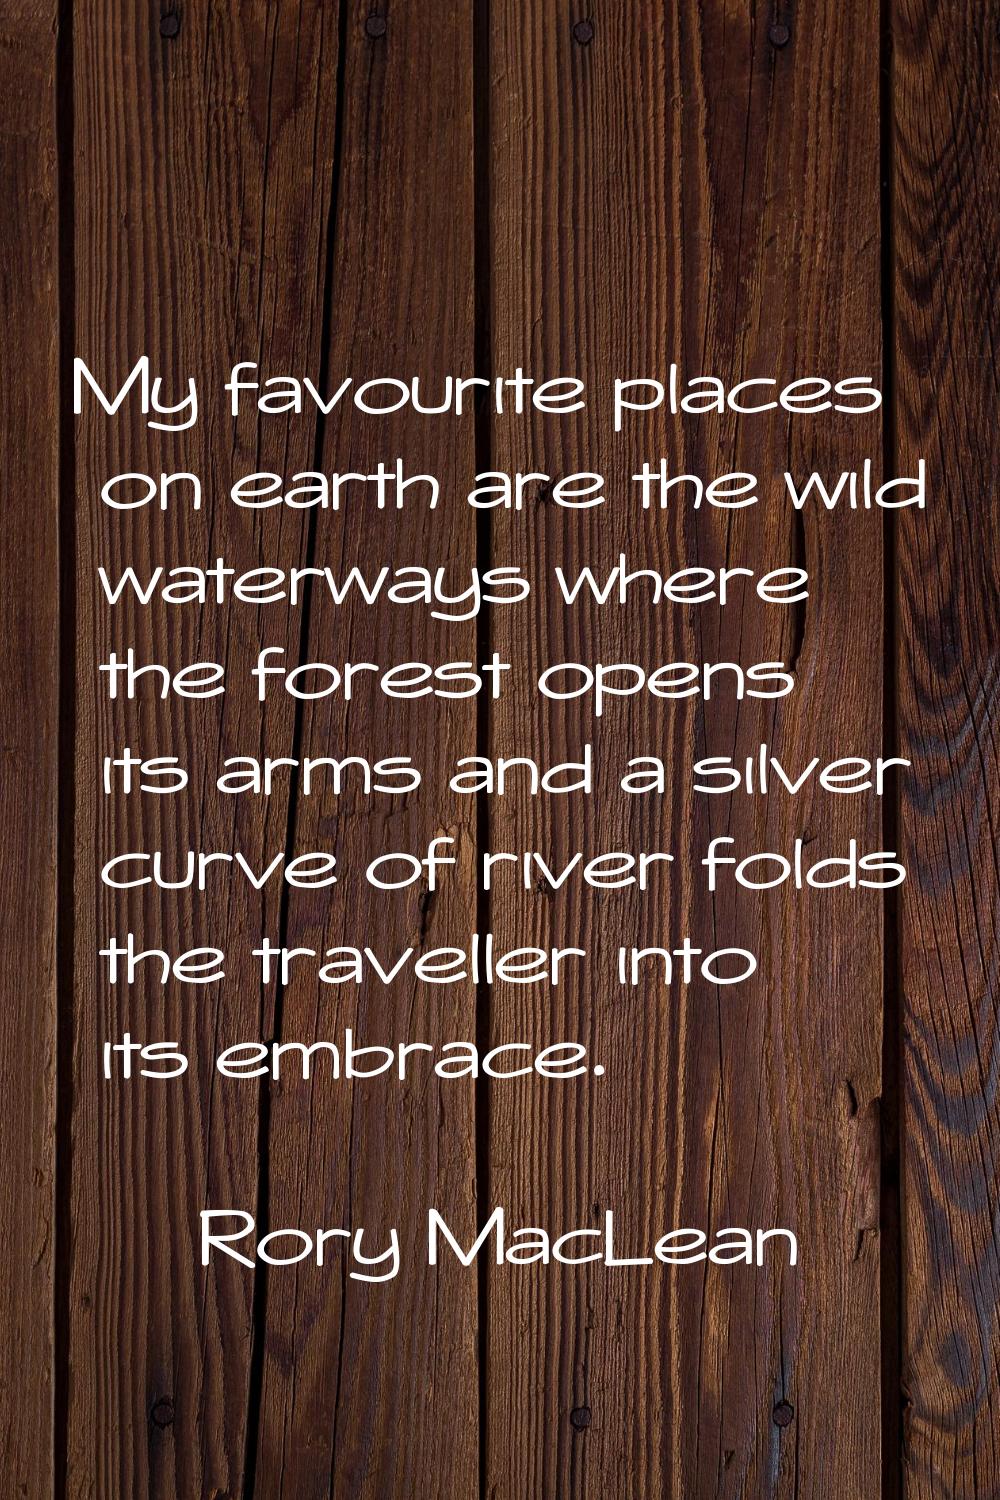 My favourite places on earth are the wild waterways where the forest opens its arms and a silver cu